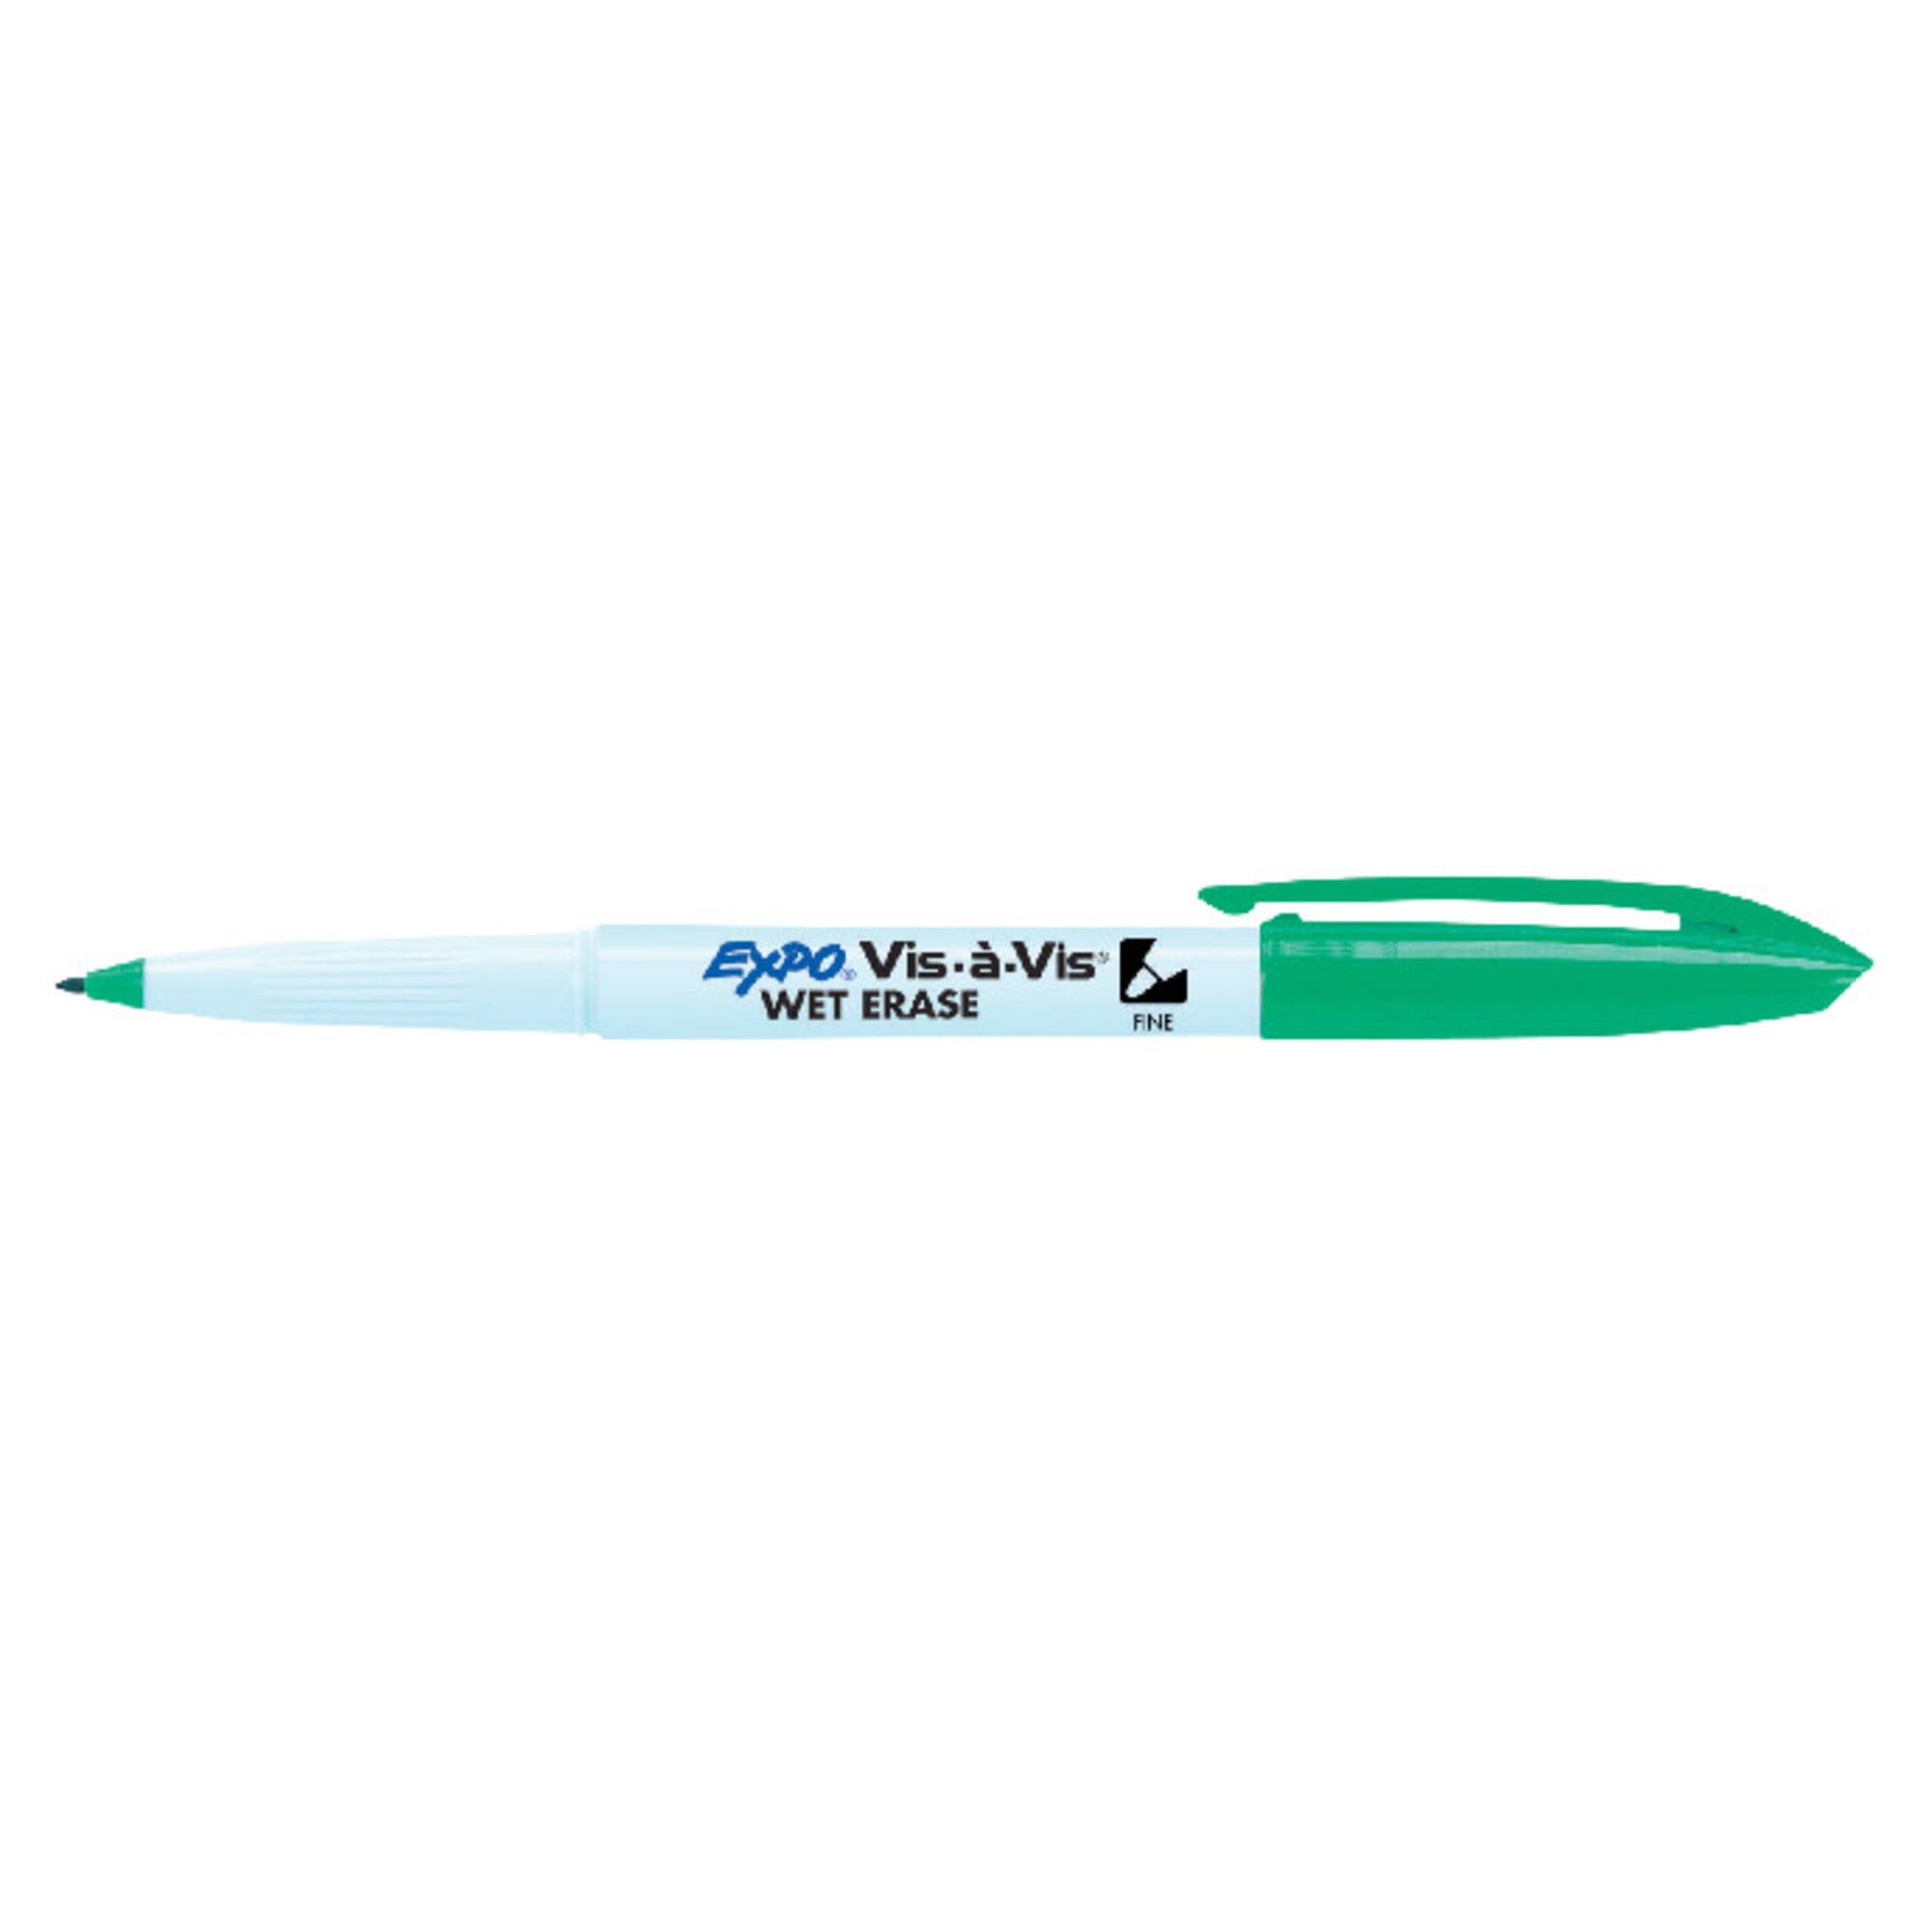 Wet Erase Markers, Shuttle Art 12 Colors Fine Tip Overhead Transparency  Smudge-Free Markers, Workers for Laminated Calendars Whiteboard Schedule  Glass,Wipe with Water 